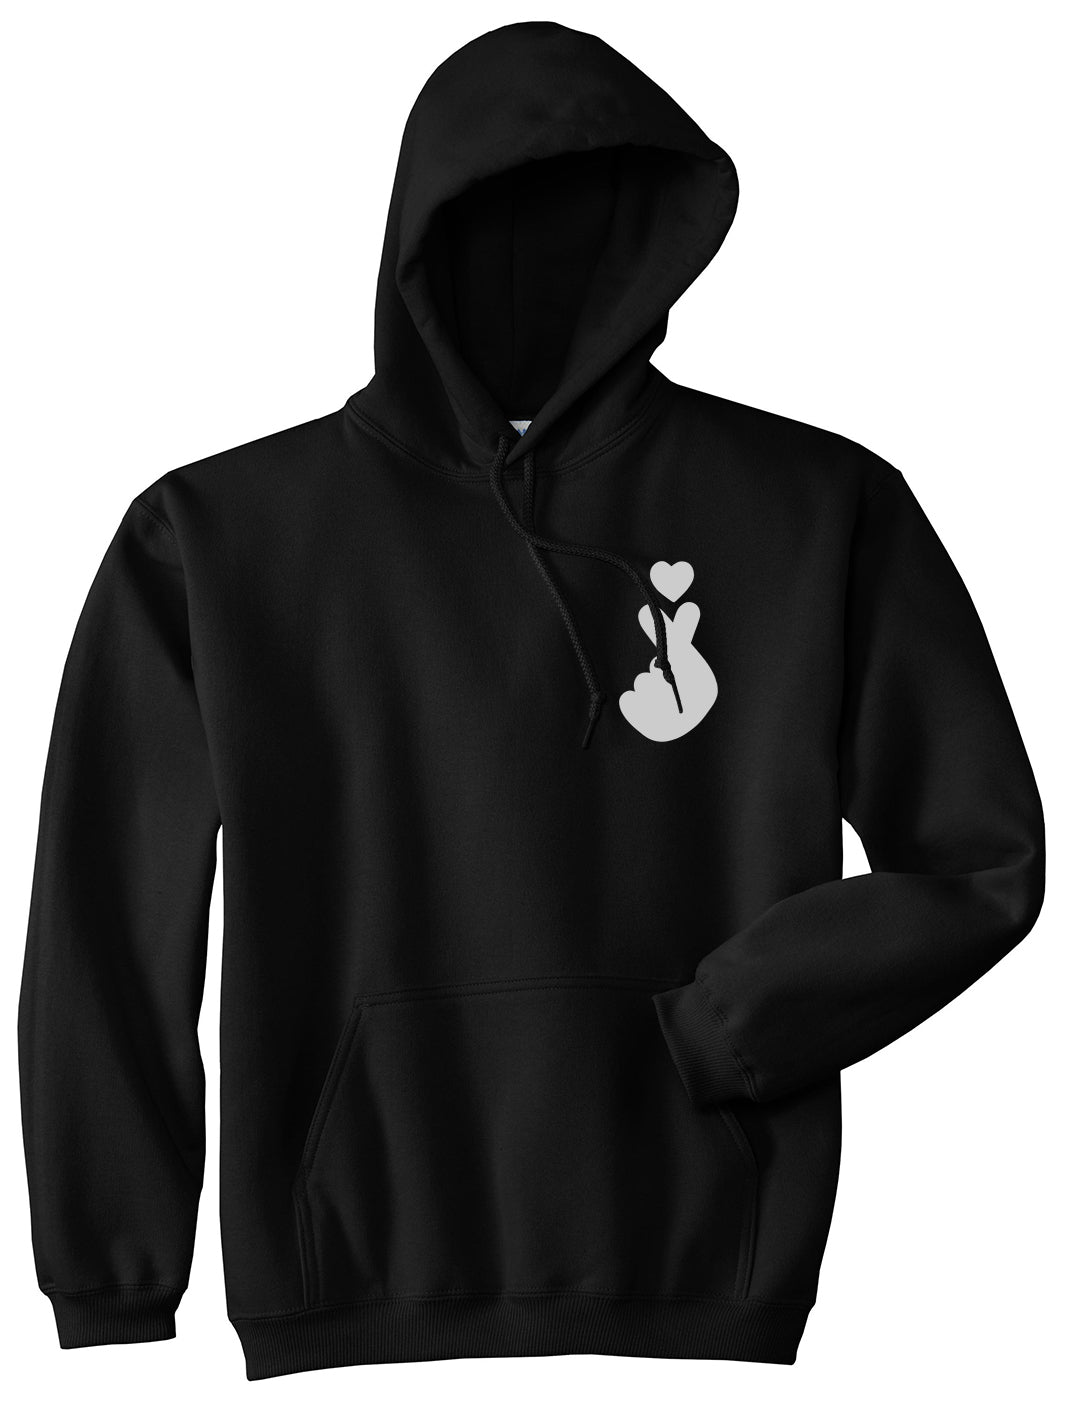 Finger Heart Emoji Chest Mens Black Pullover Hoodie by KINGS OF NY